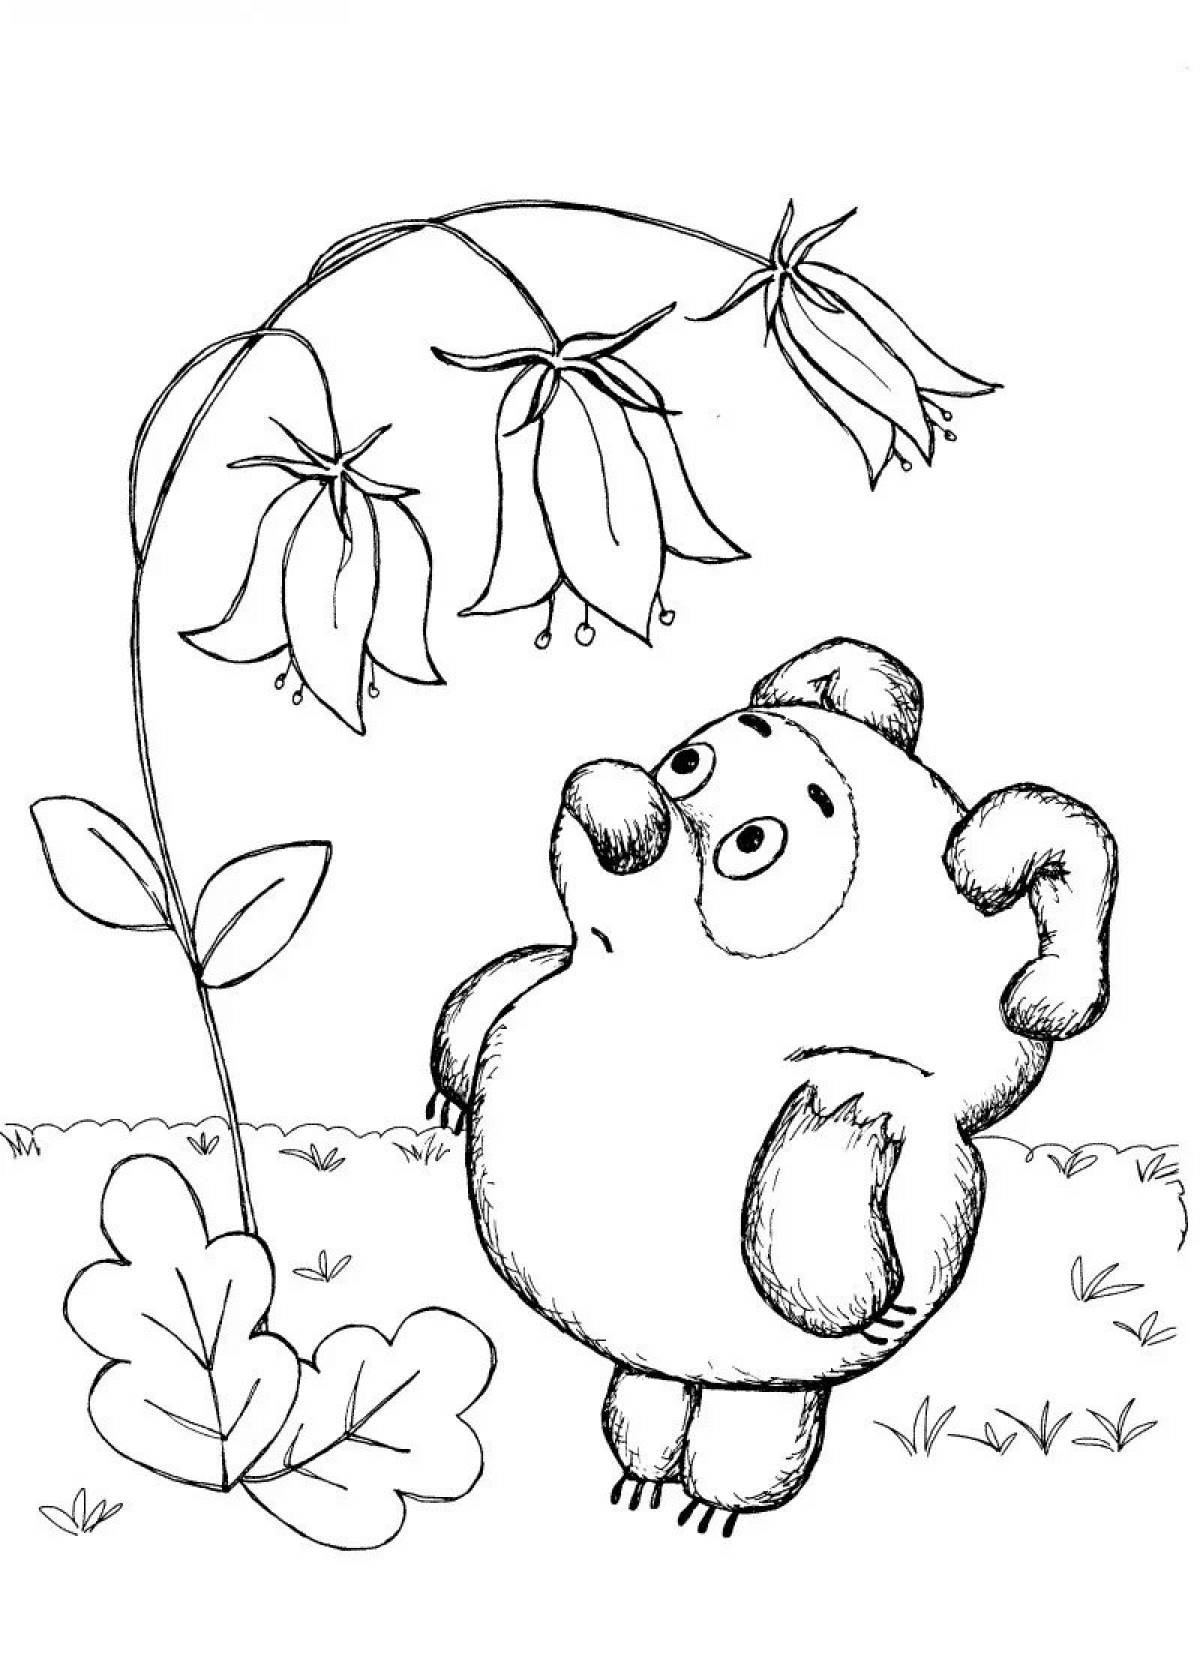 Ecstatic fluff coloring page